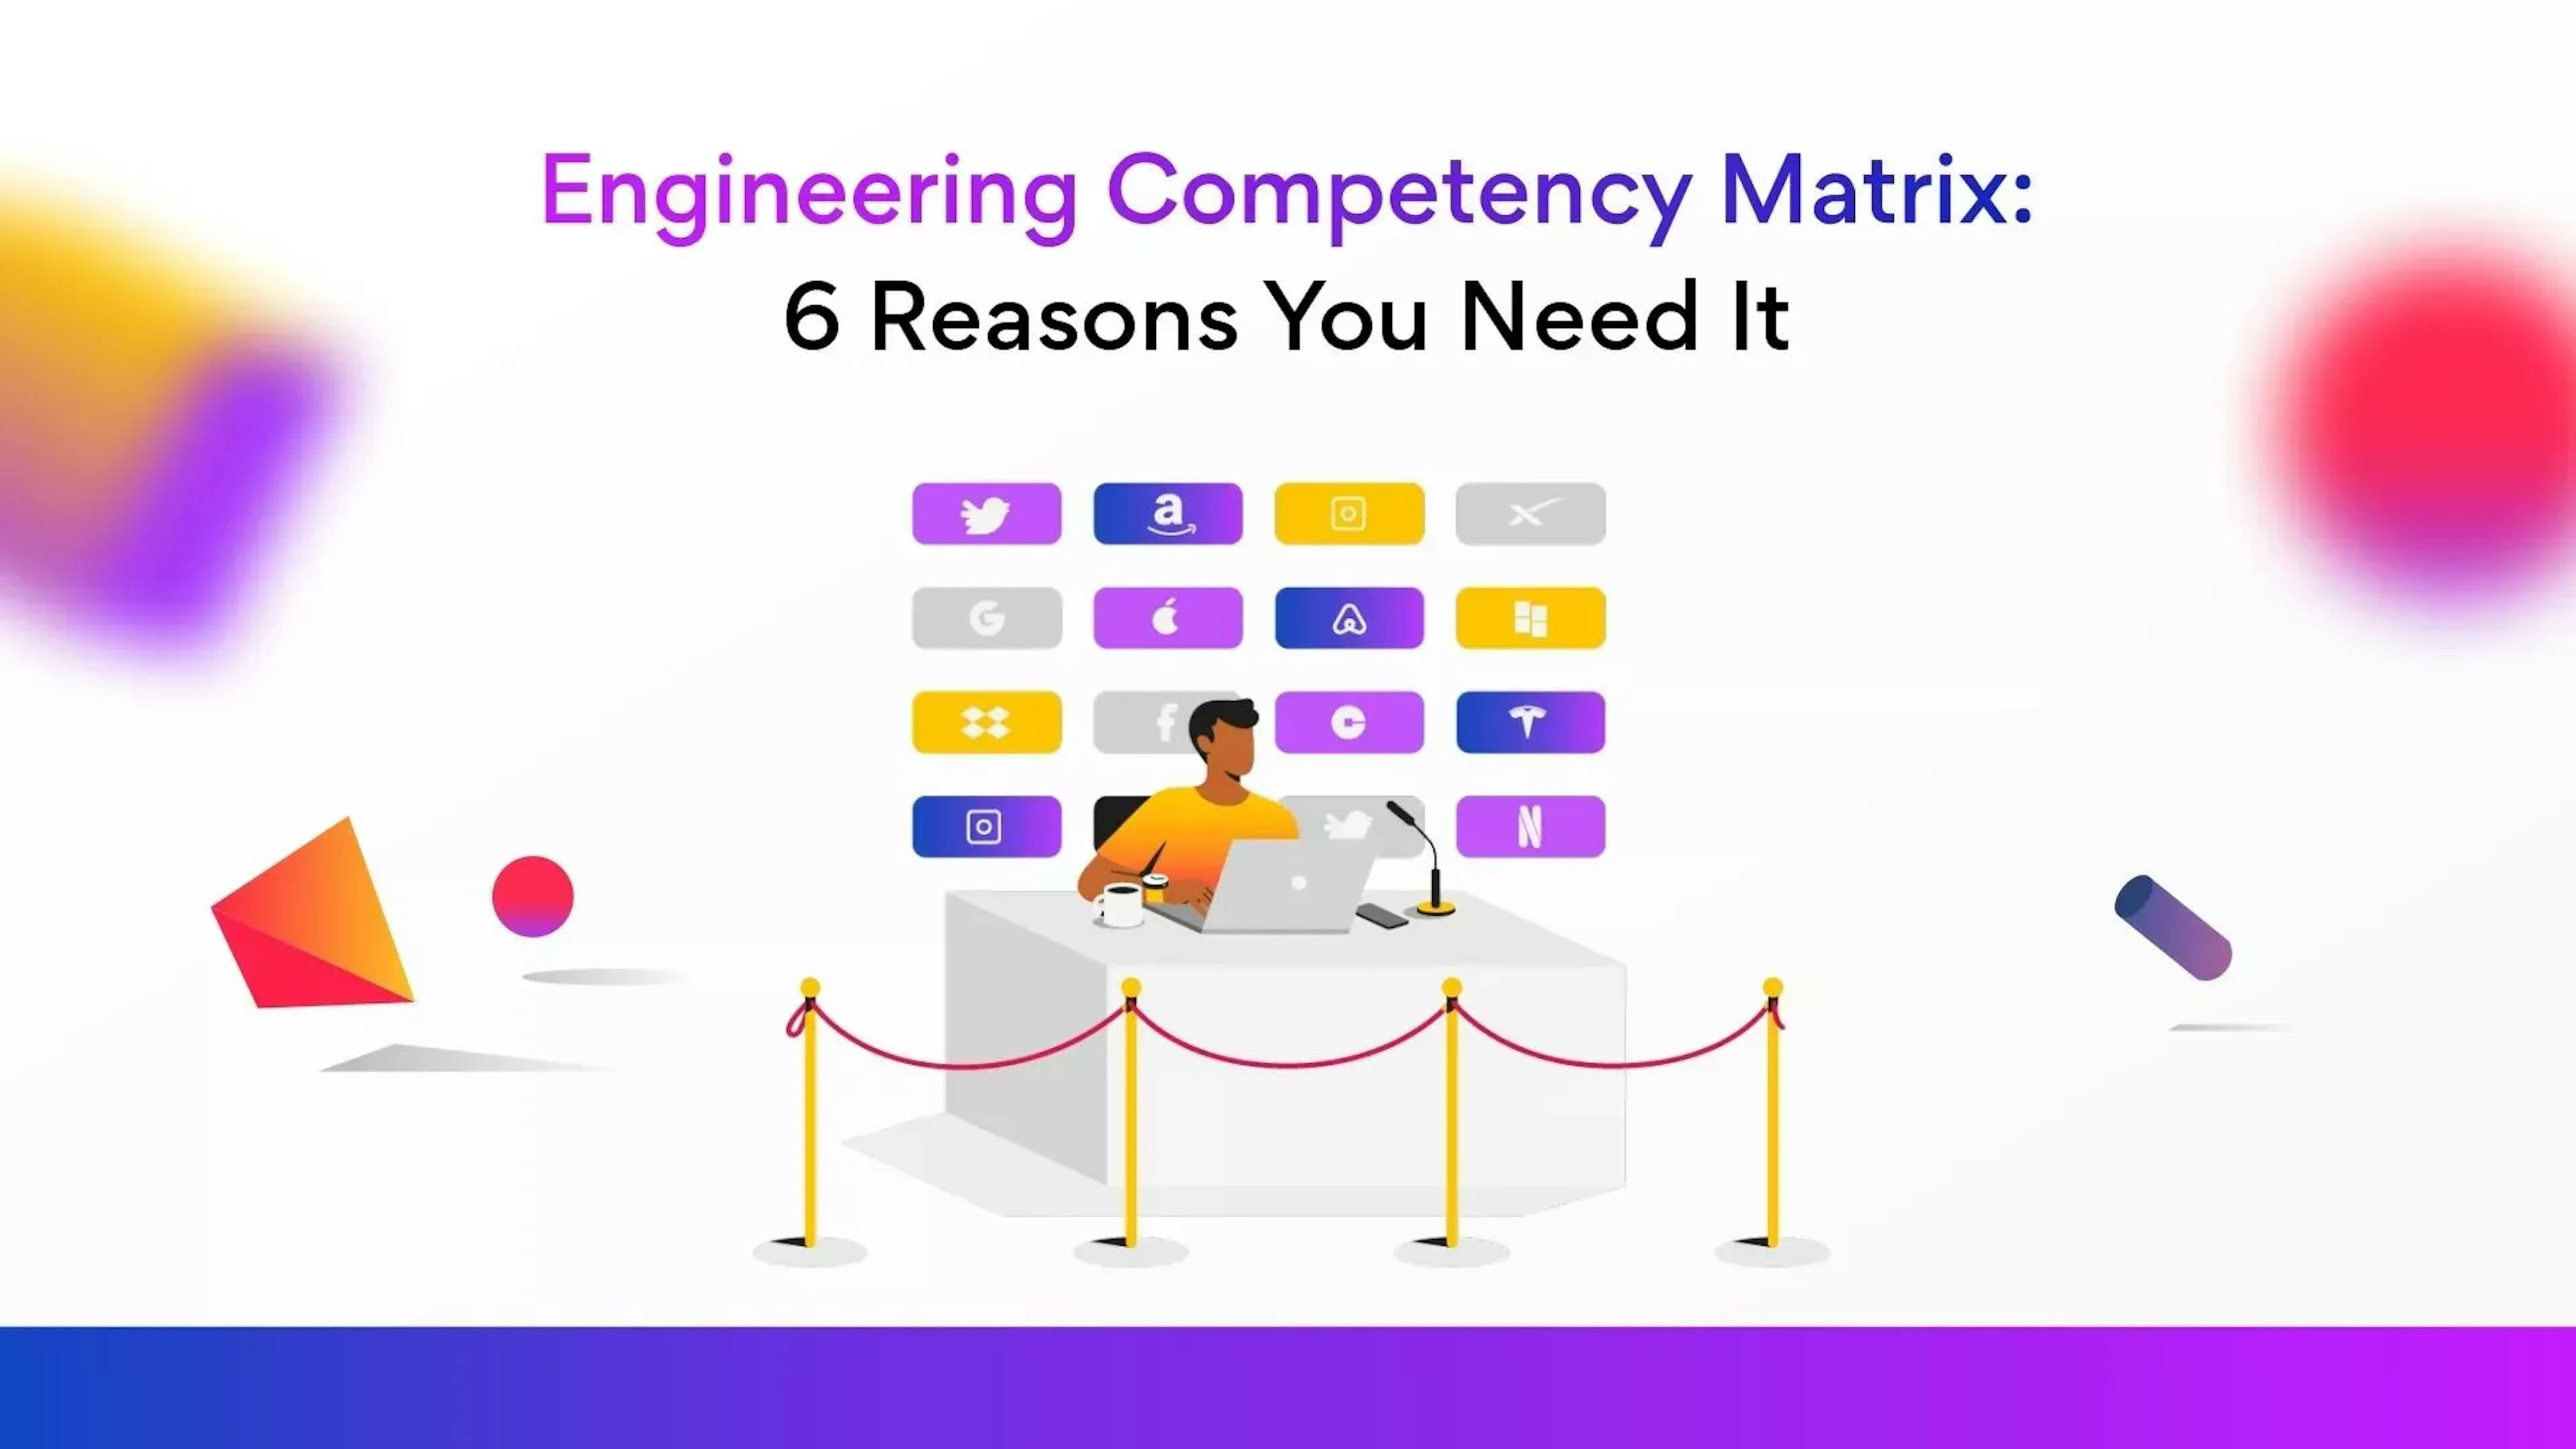 Engineering Competency Matrix: Here’s Why You Need It